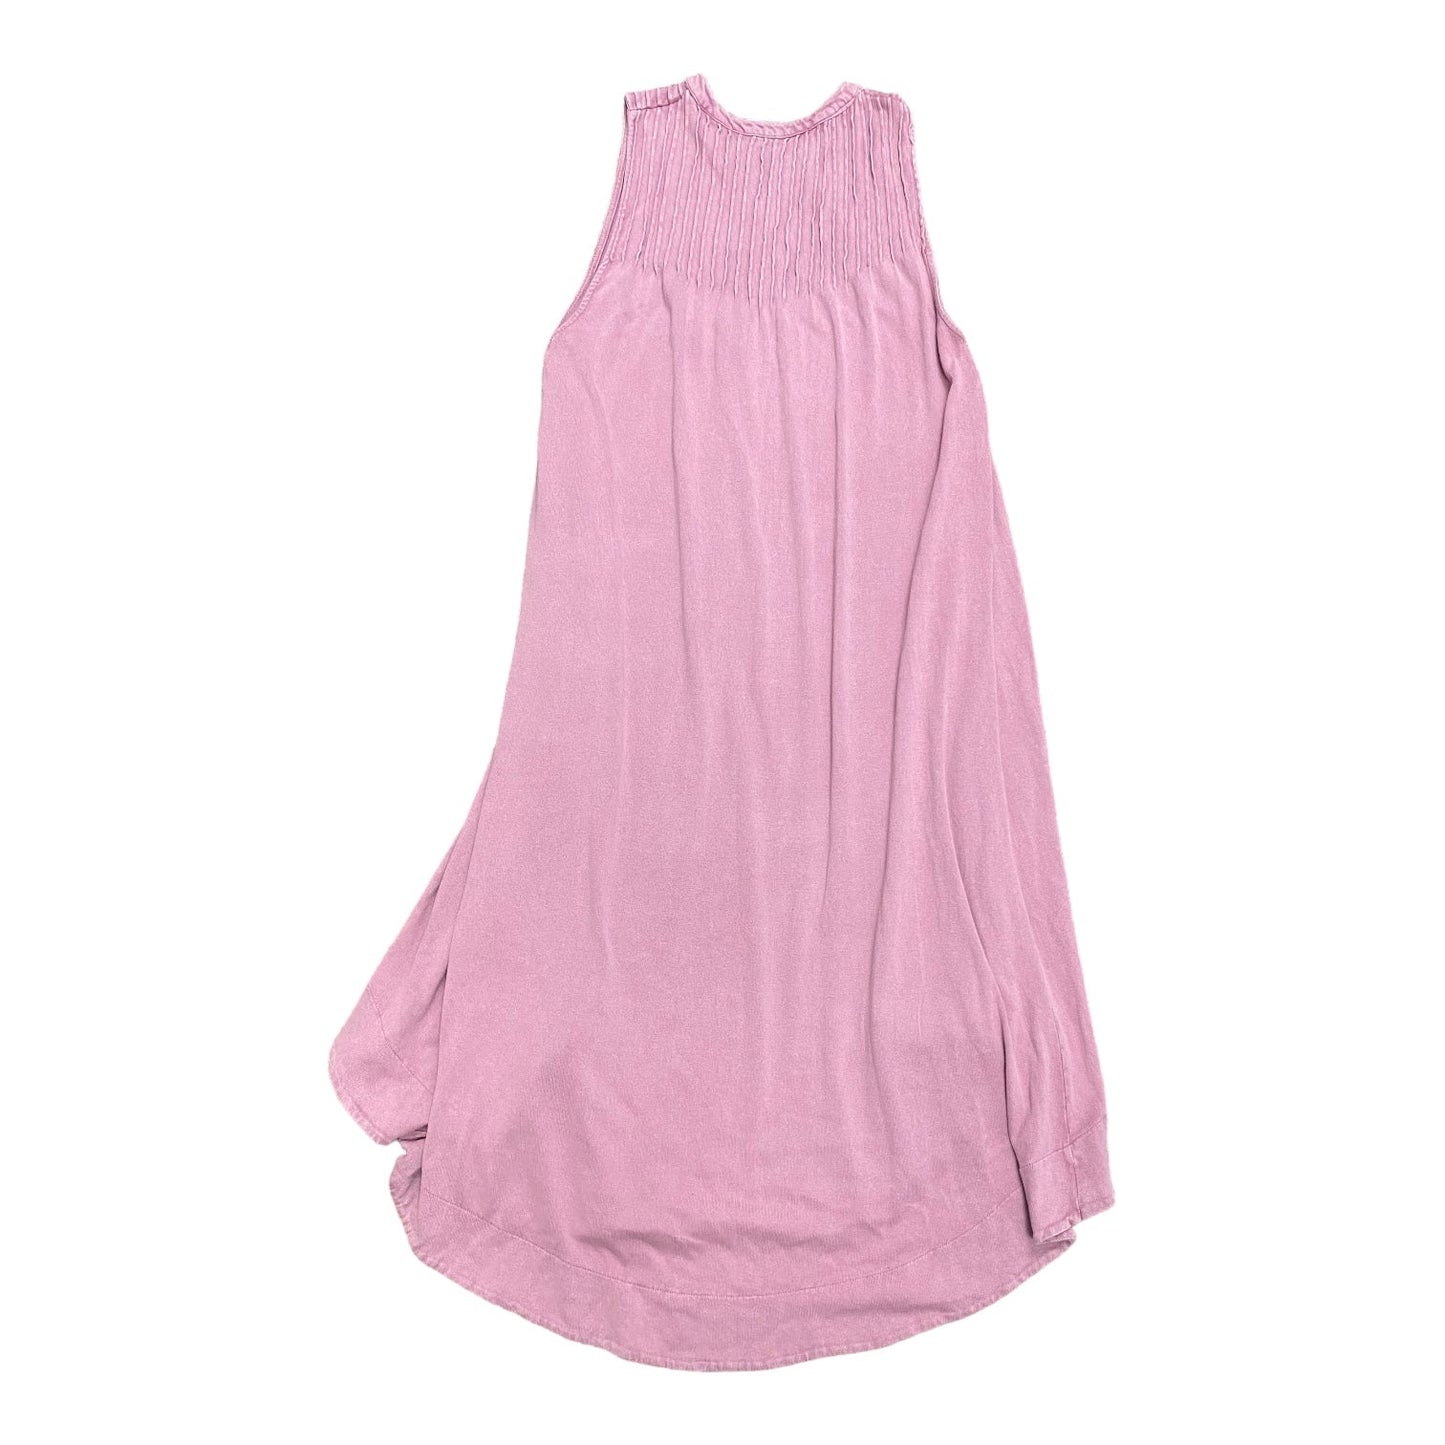 Pink Dress Casual Maxi Free People, Size S